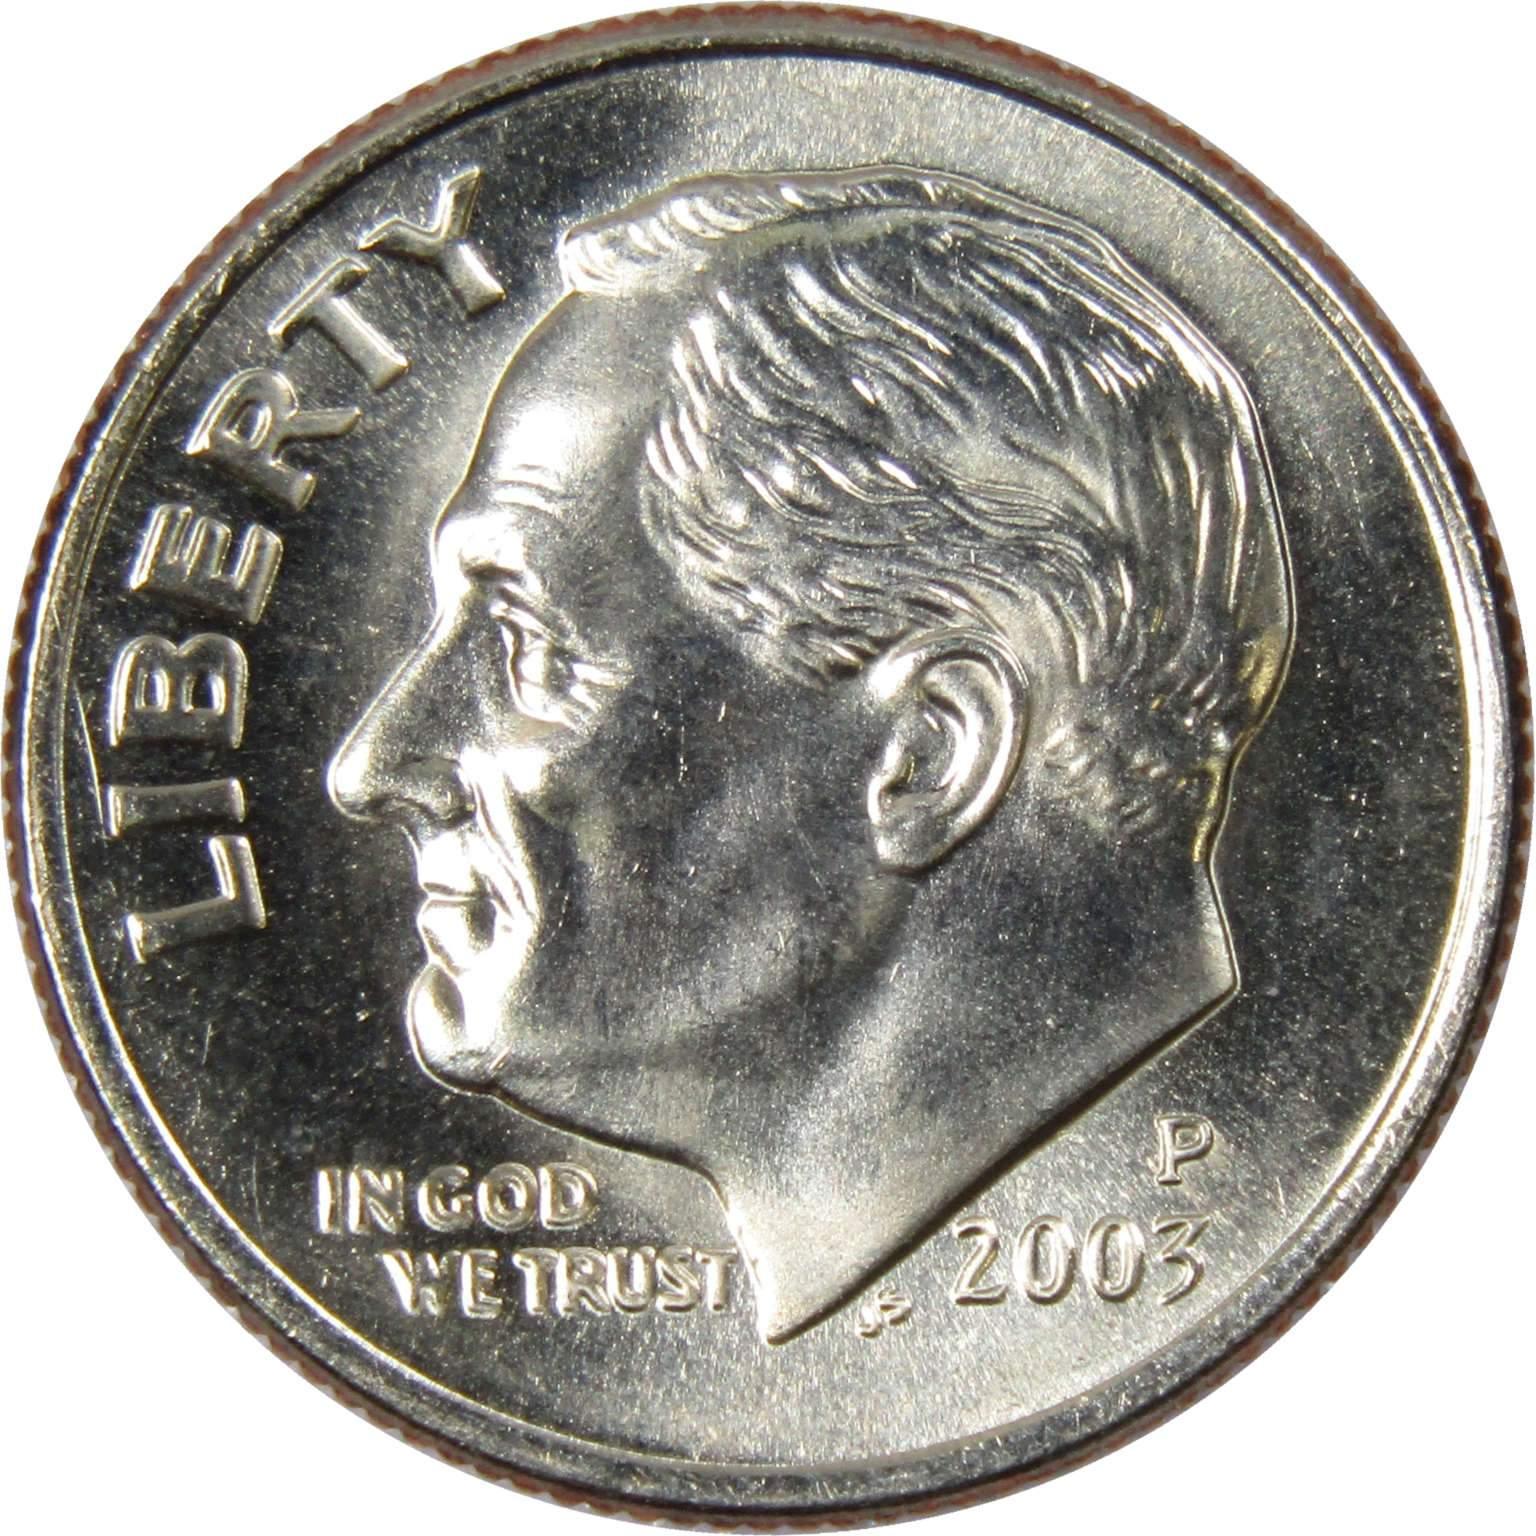 2003 P Roosevelt Dime BU Uncirculated Mint State 10c US Coin Collectible